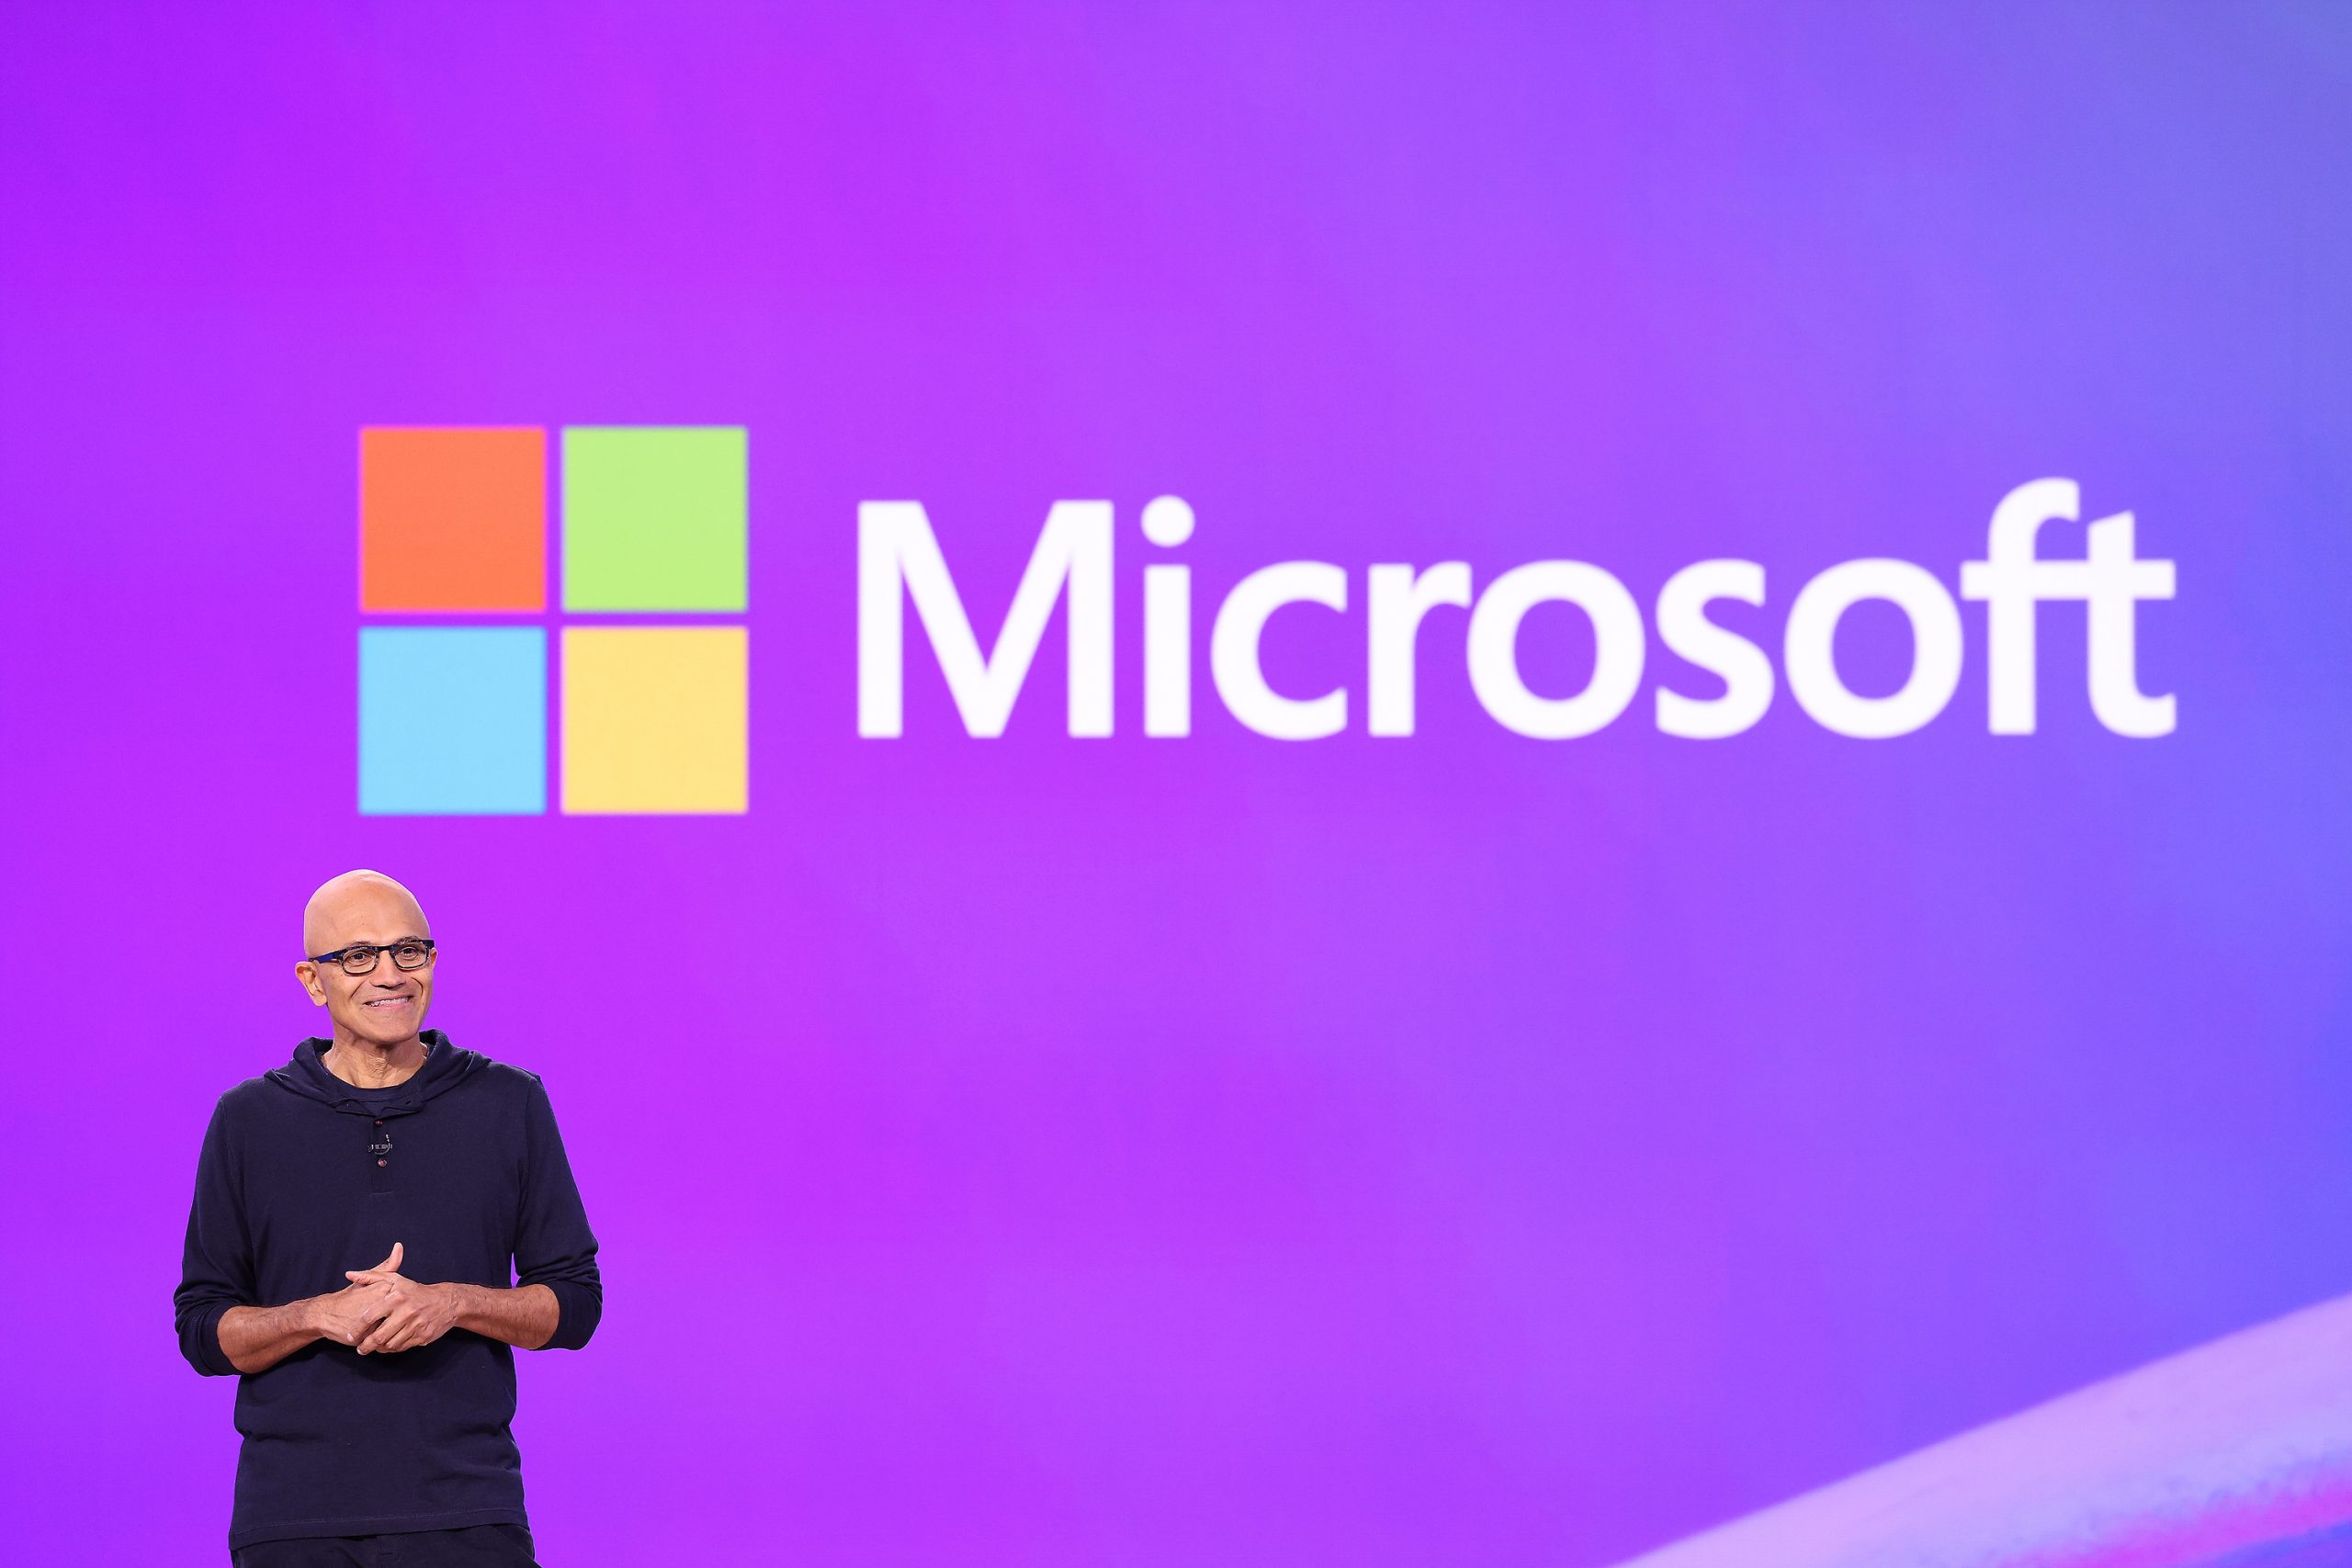 A man standing on stage with a purple background and the Microsoft logo on the screen behind him